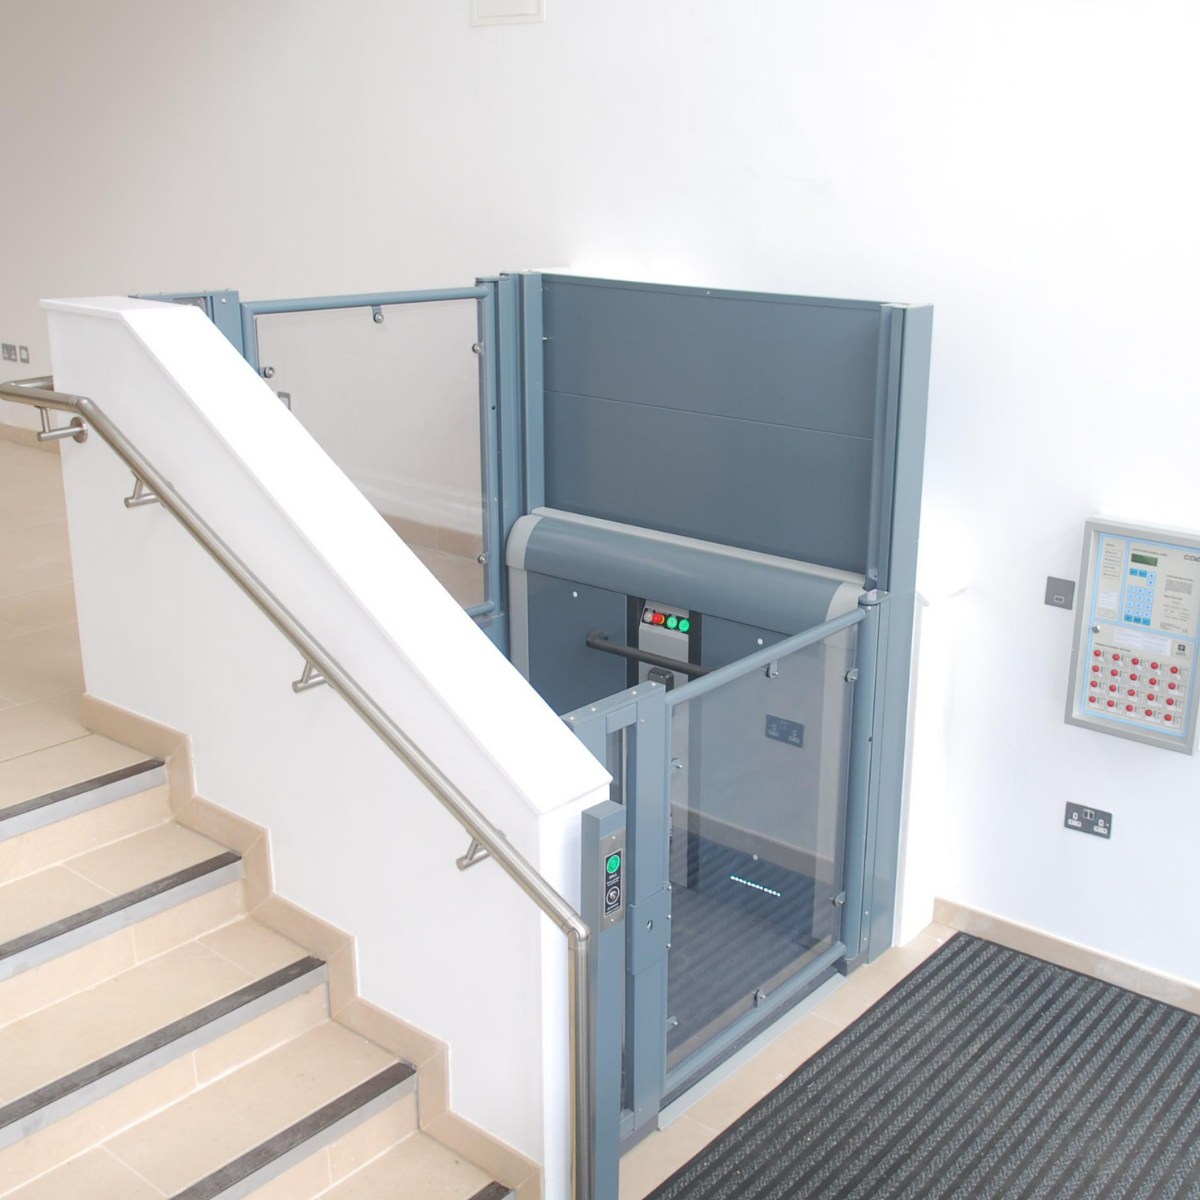 Images Stannah Lifts & Stairlifts Southern England Service Branch